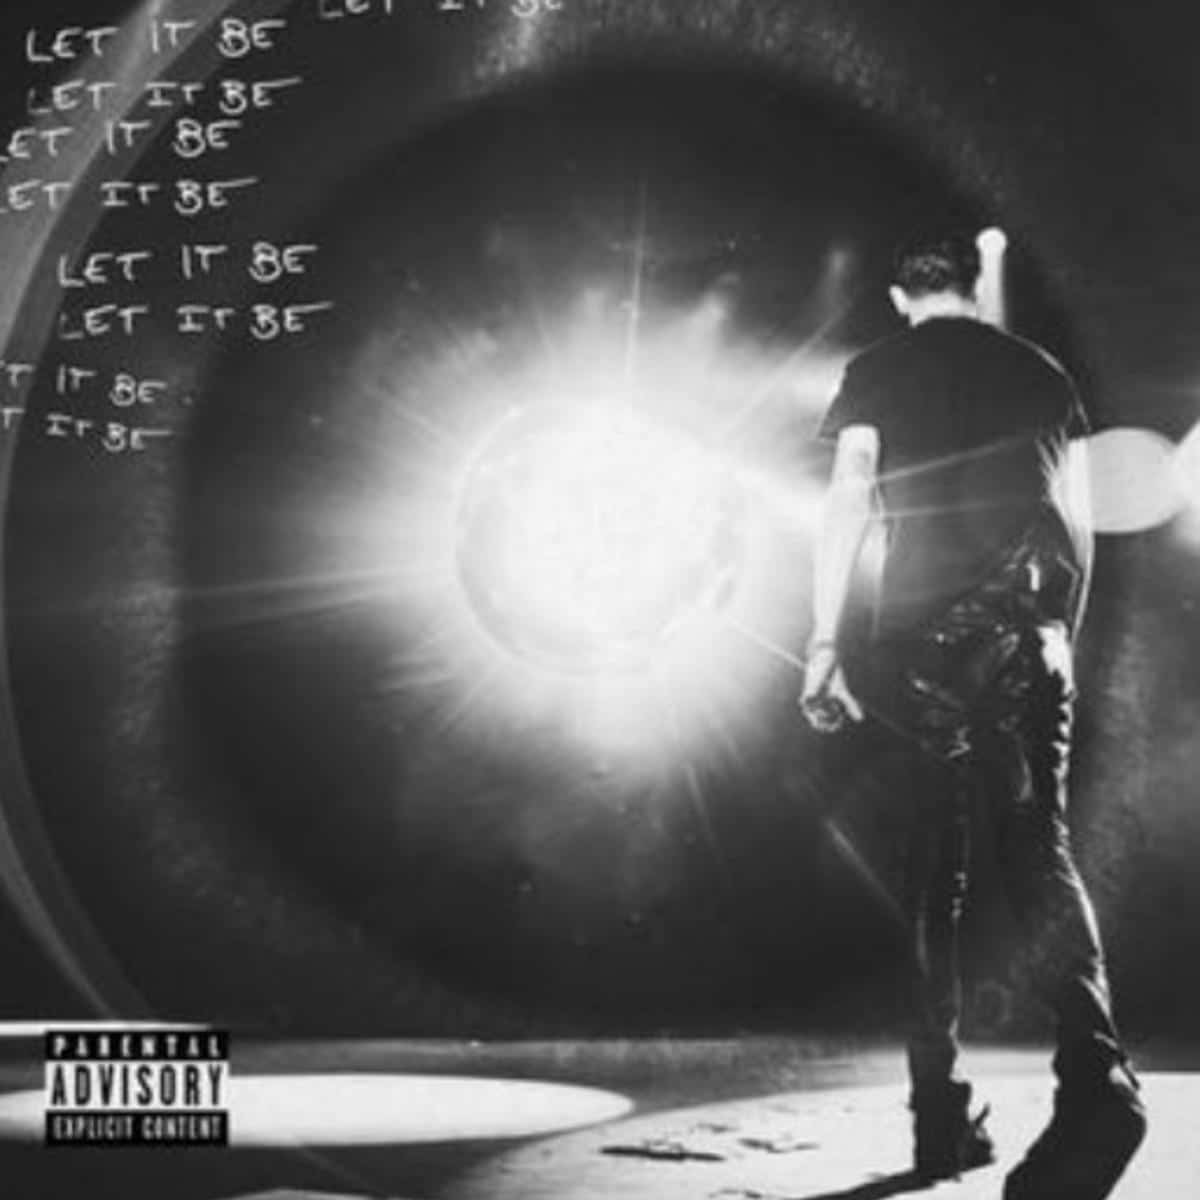 G-Eazy Feat. OG Maco - Let It Be (Freestyle) Mp3